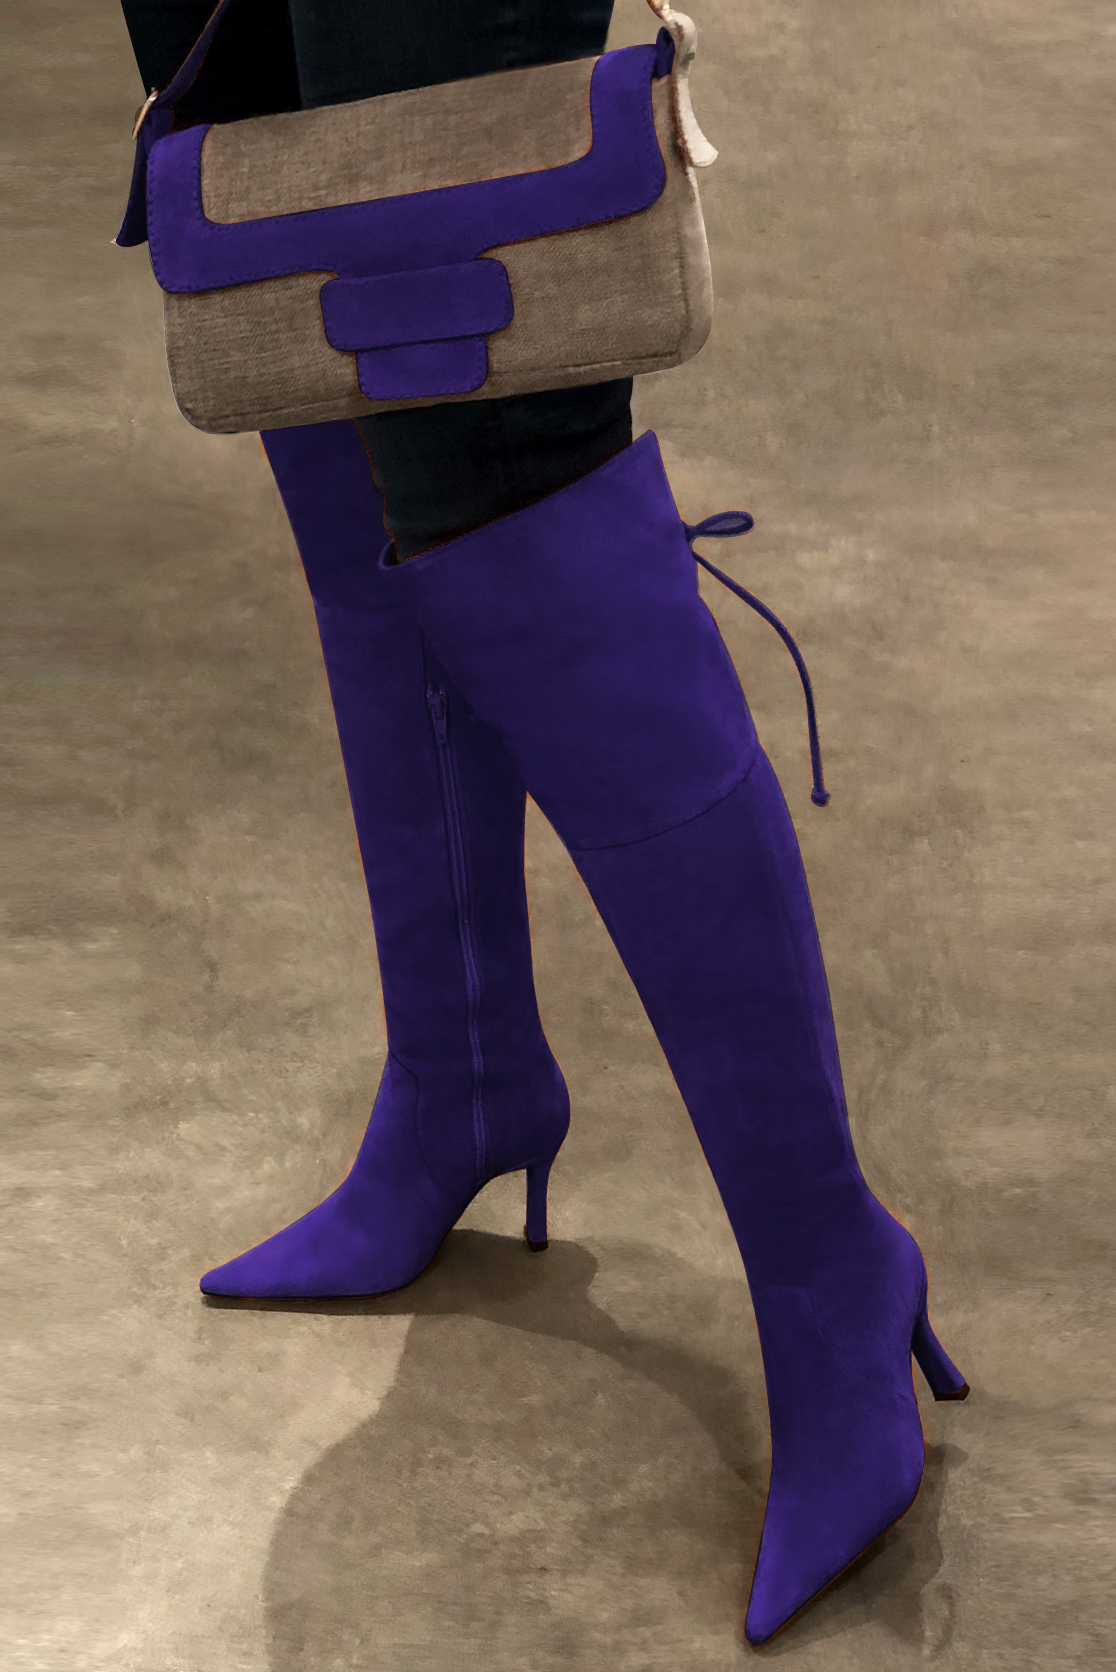 Violet purple women's leather thigh-high boots. Pointed toe. Very high spool heels. Made to measure. Worn view - Florence KOOIJMAN